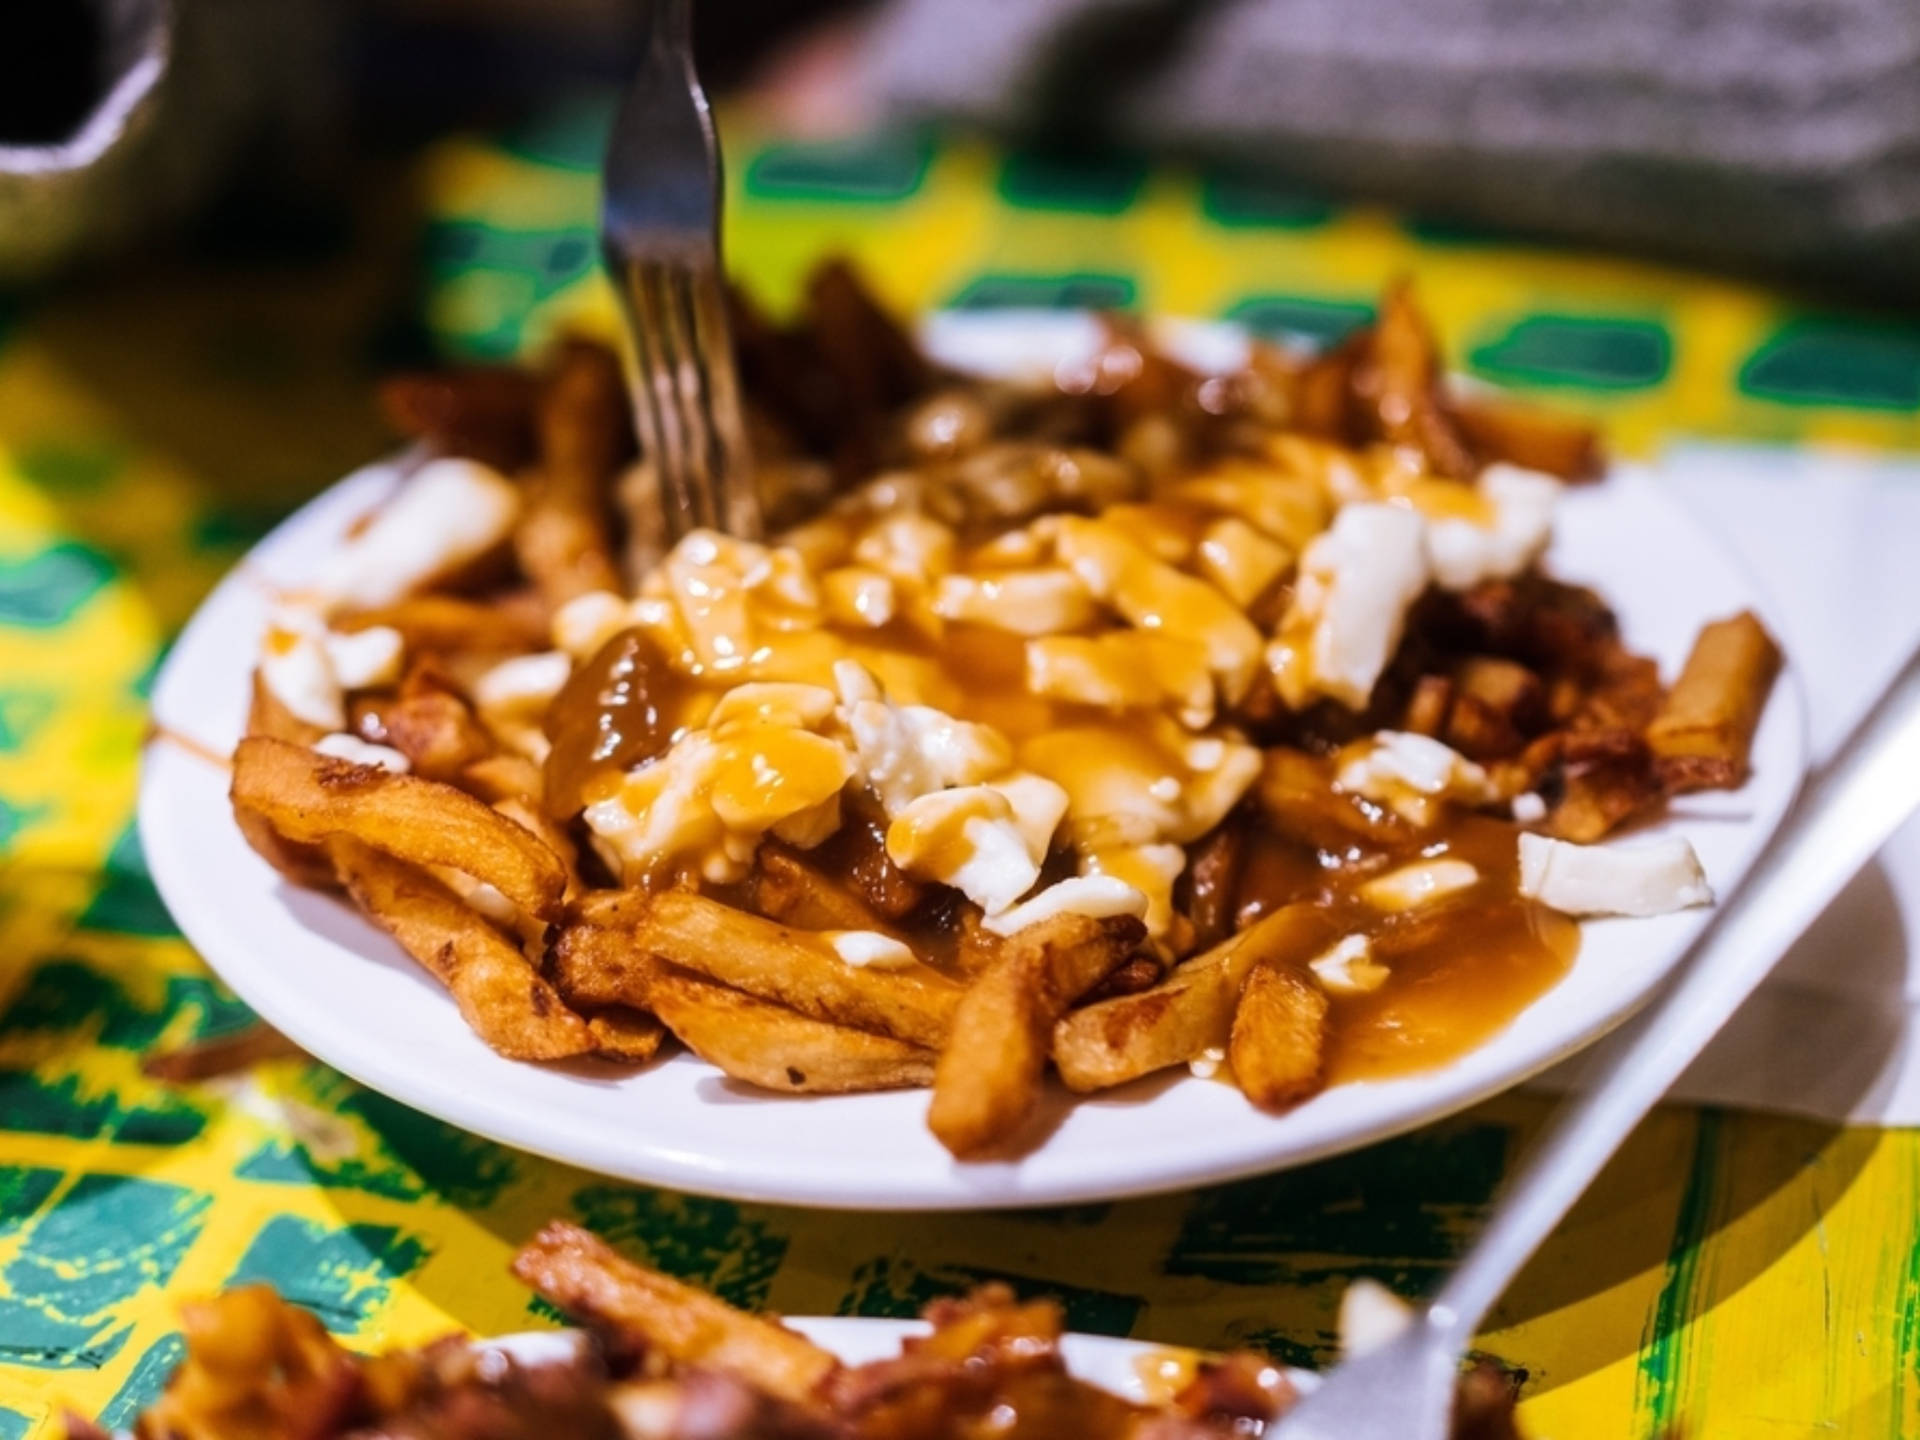 Delectable Forkful of Poutine Wallpaper